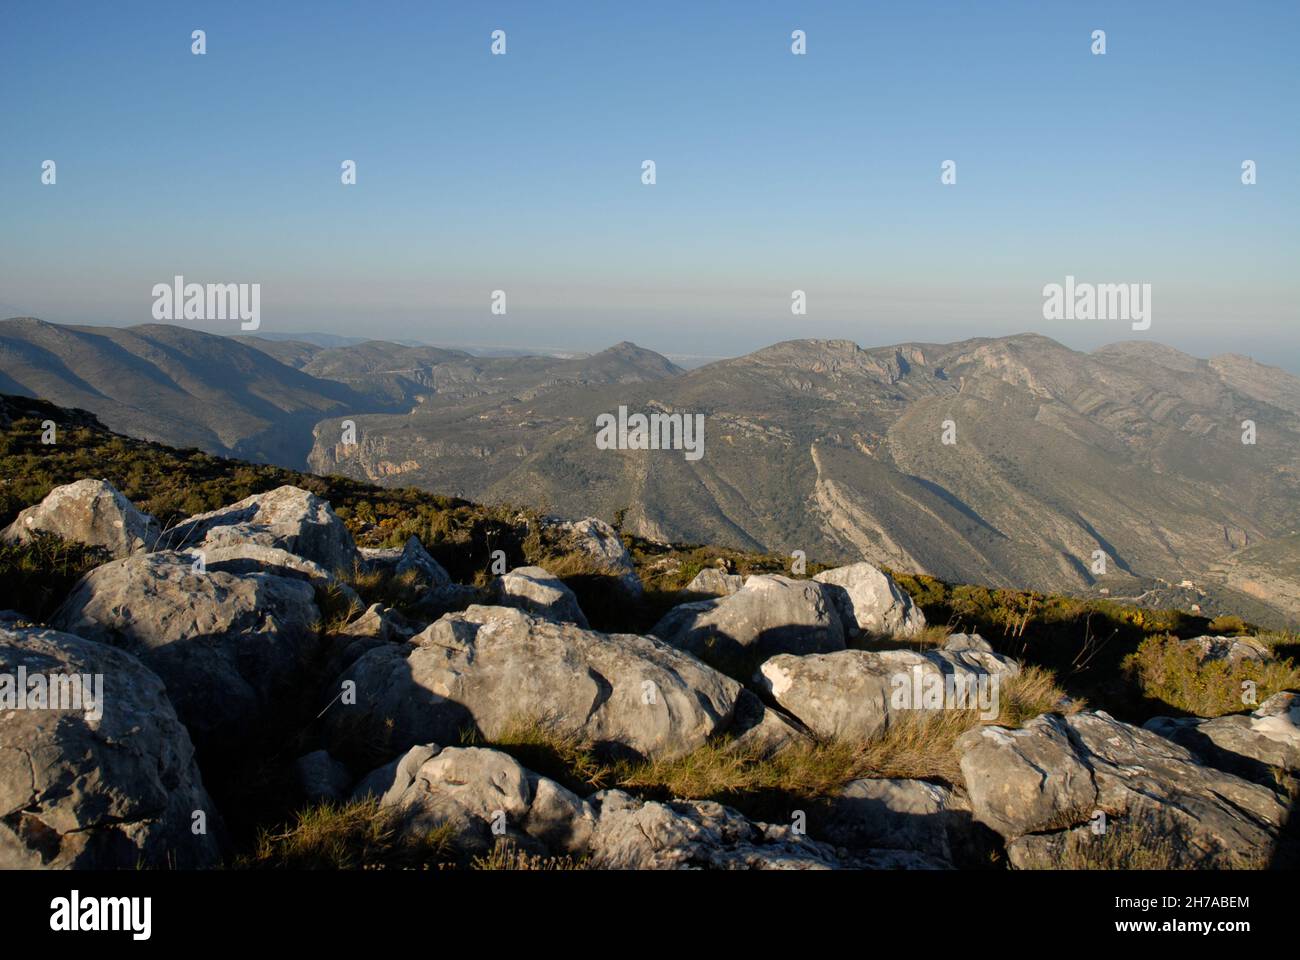 View from the top of Cavall Verd near Benimaurell in the Vall de Laguar, to distant mountains and Mediterranean coast beyond, Alicante Province, Spain Stock Photo